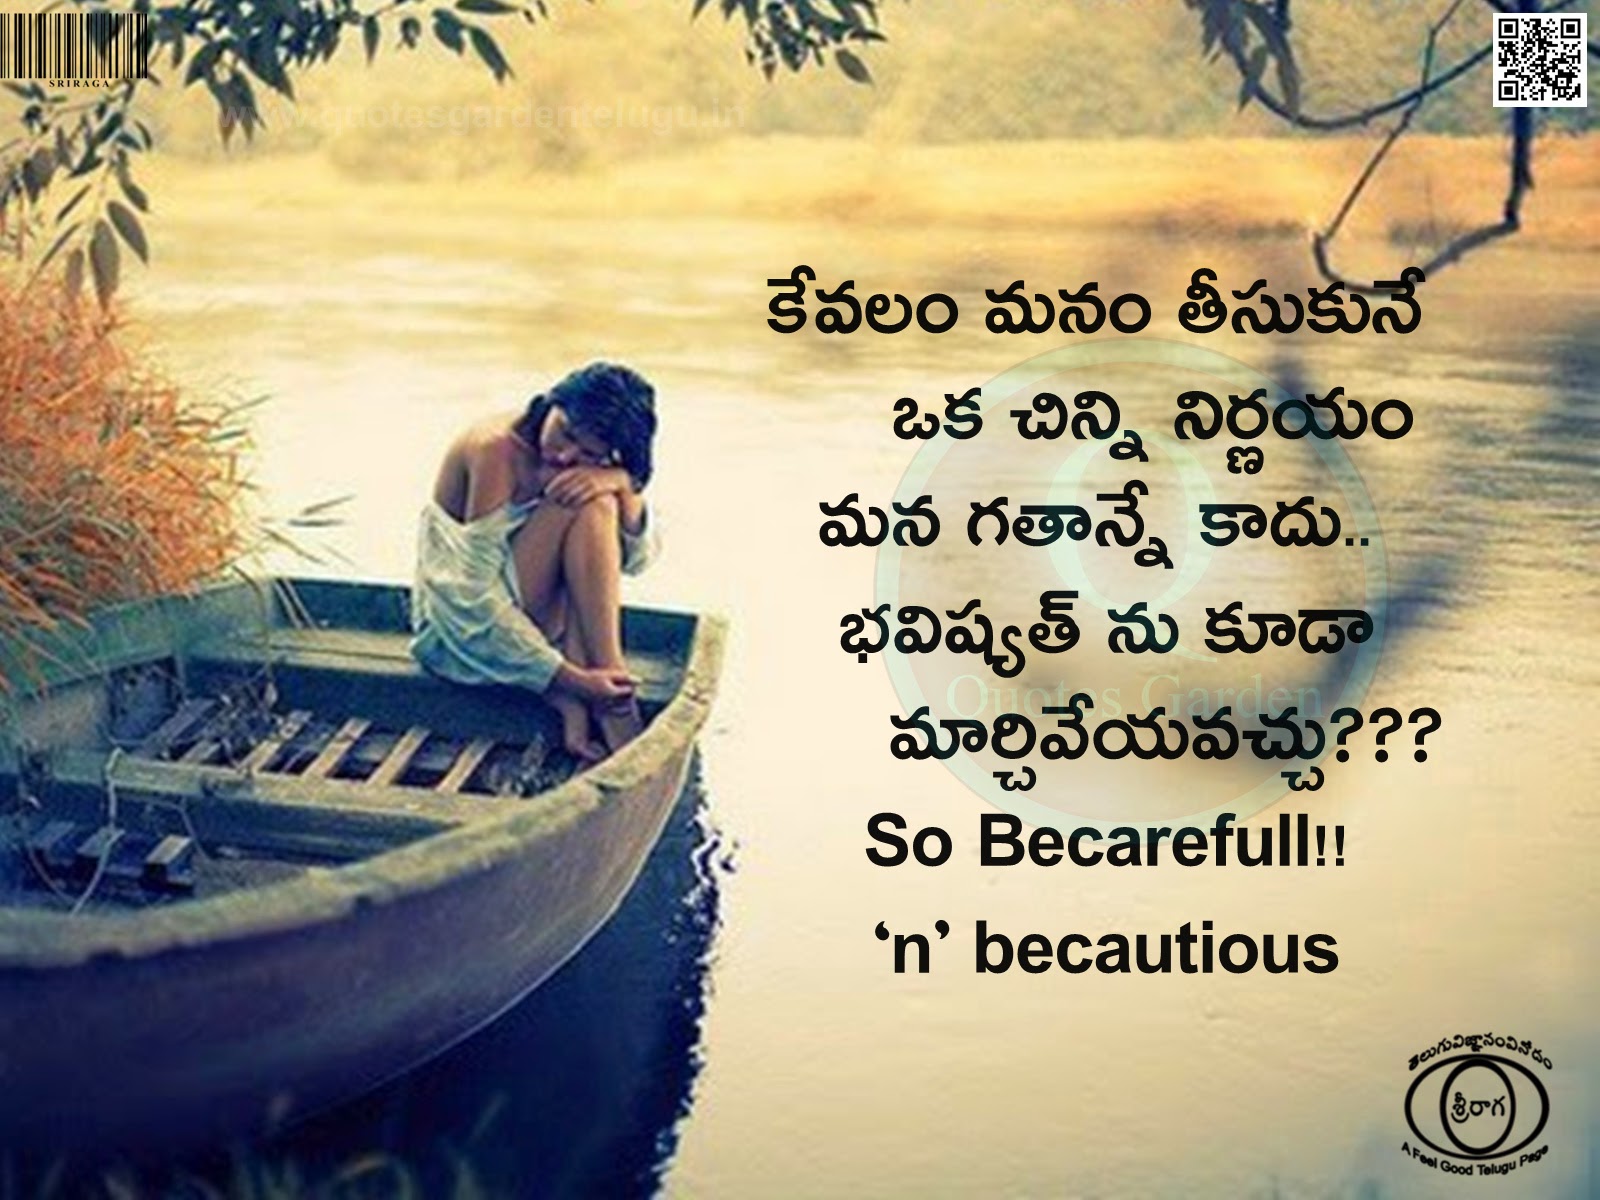 Best Telugu Quotes images n HD Wallpapers 12.02.15